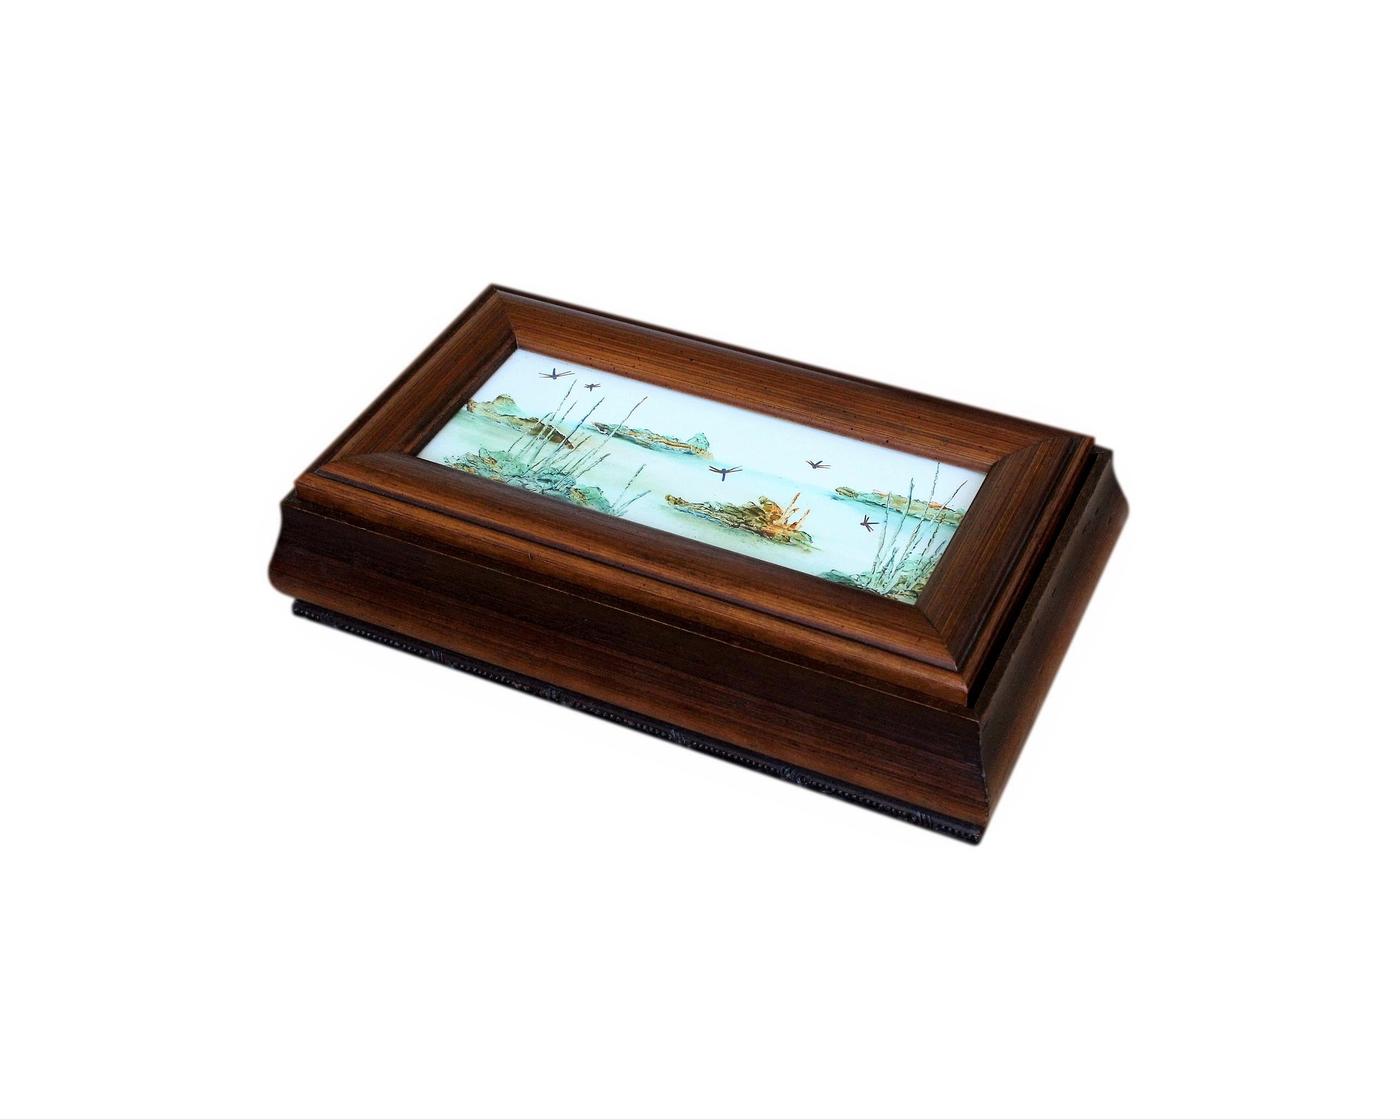 Beautiful Vintage Jewellery Box With Inset Scenic Print